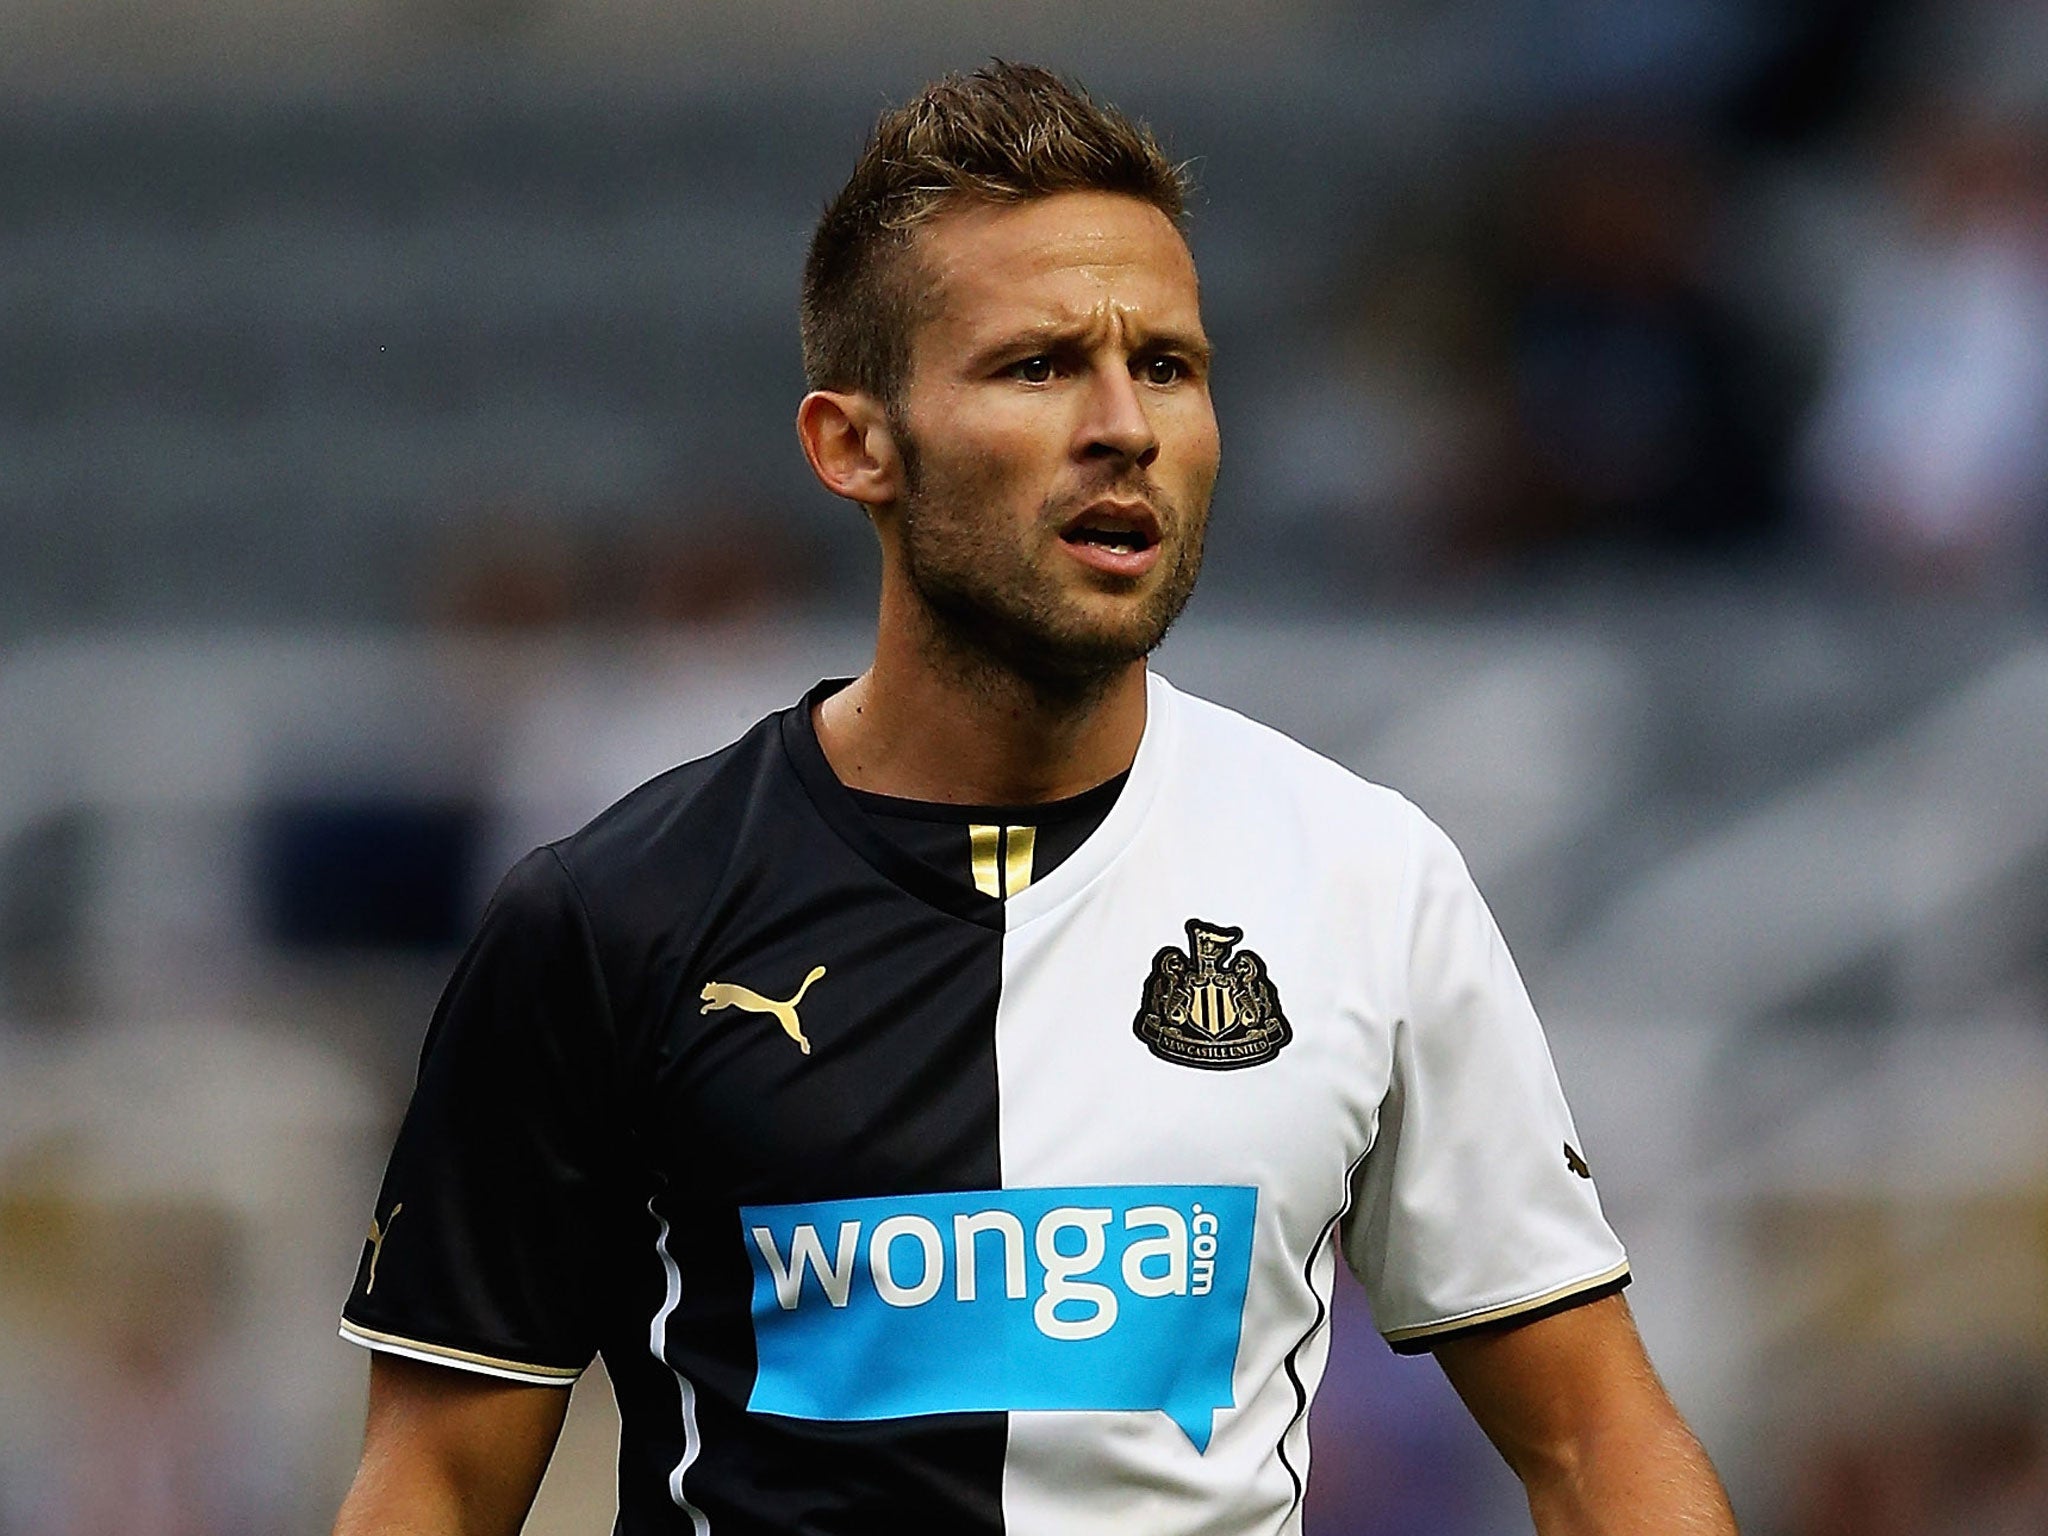 Yohan Cabaye is yet to feature for Newcastle this season